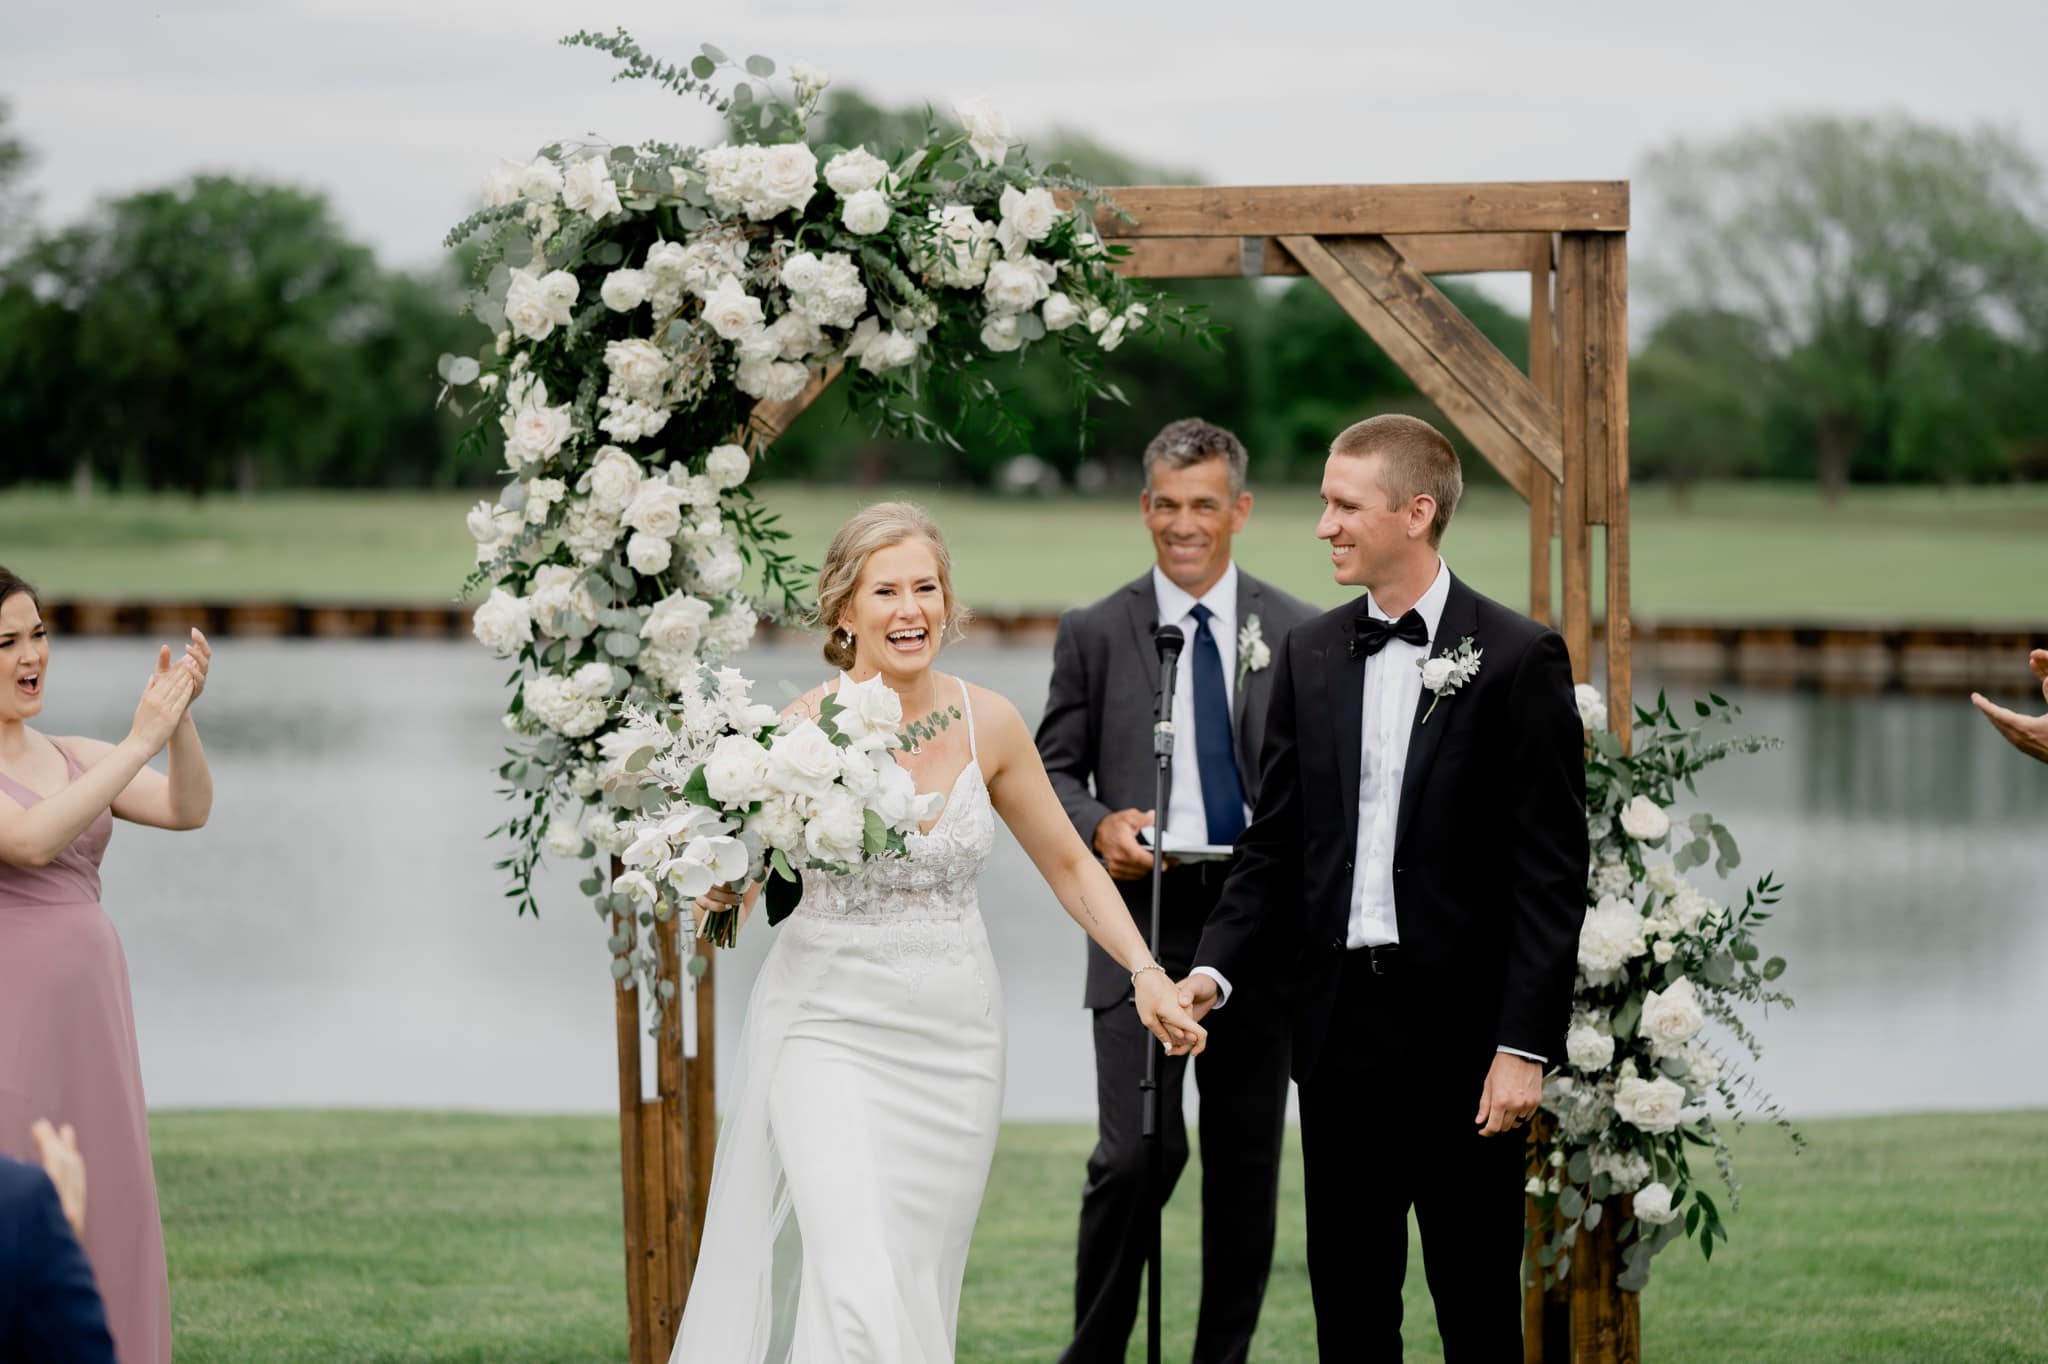 Des Moines Golf and Country Club wedding ceremony